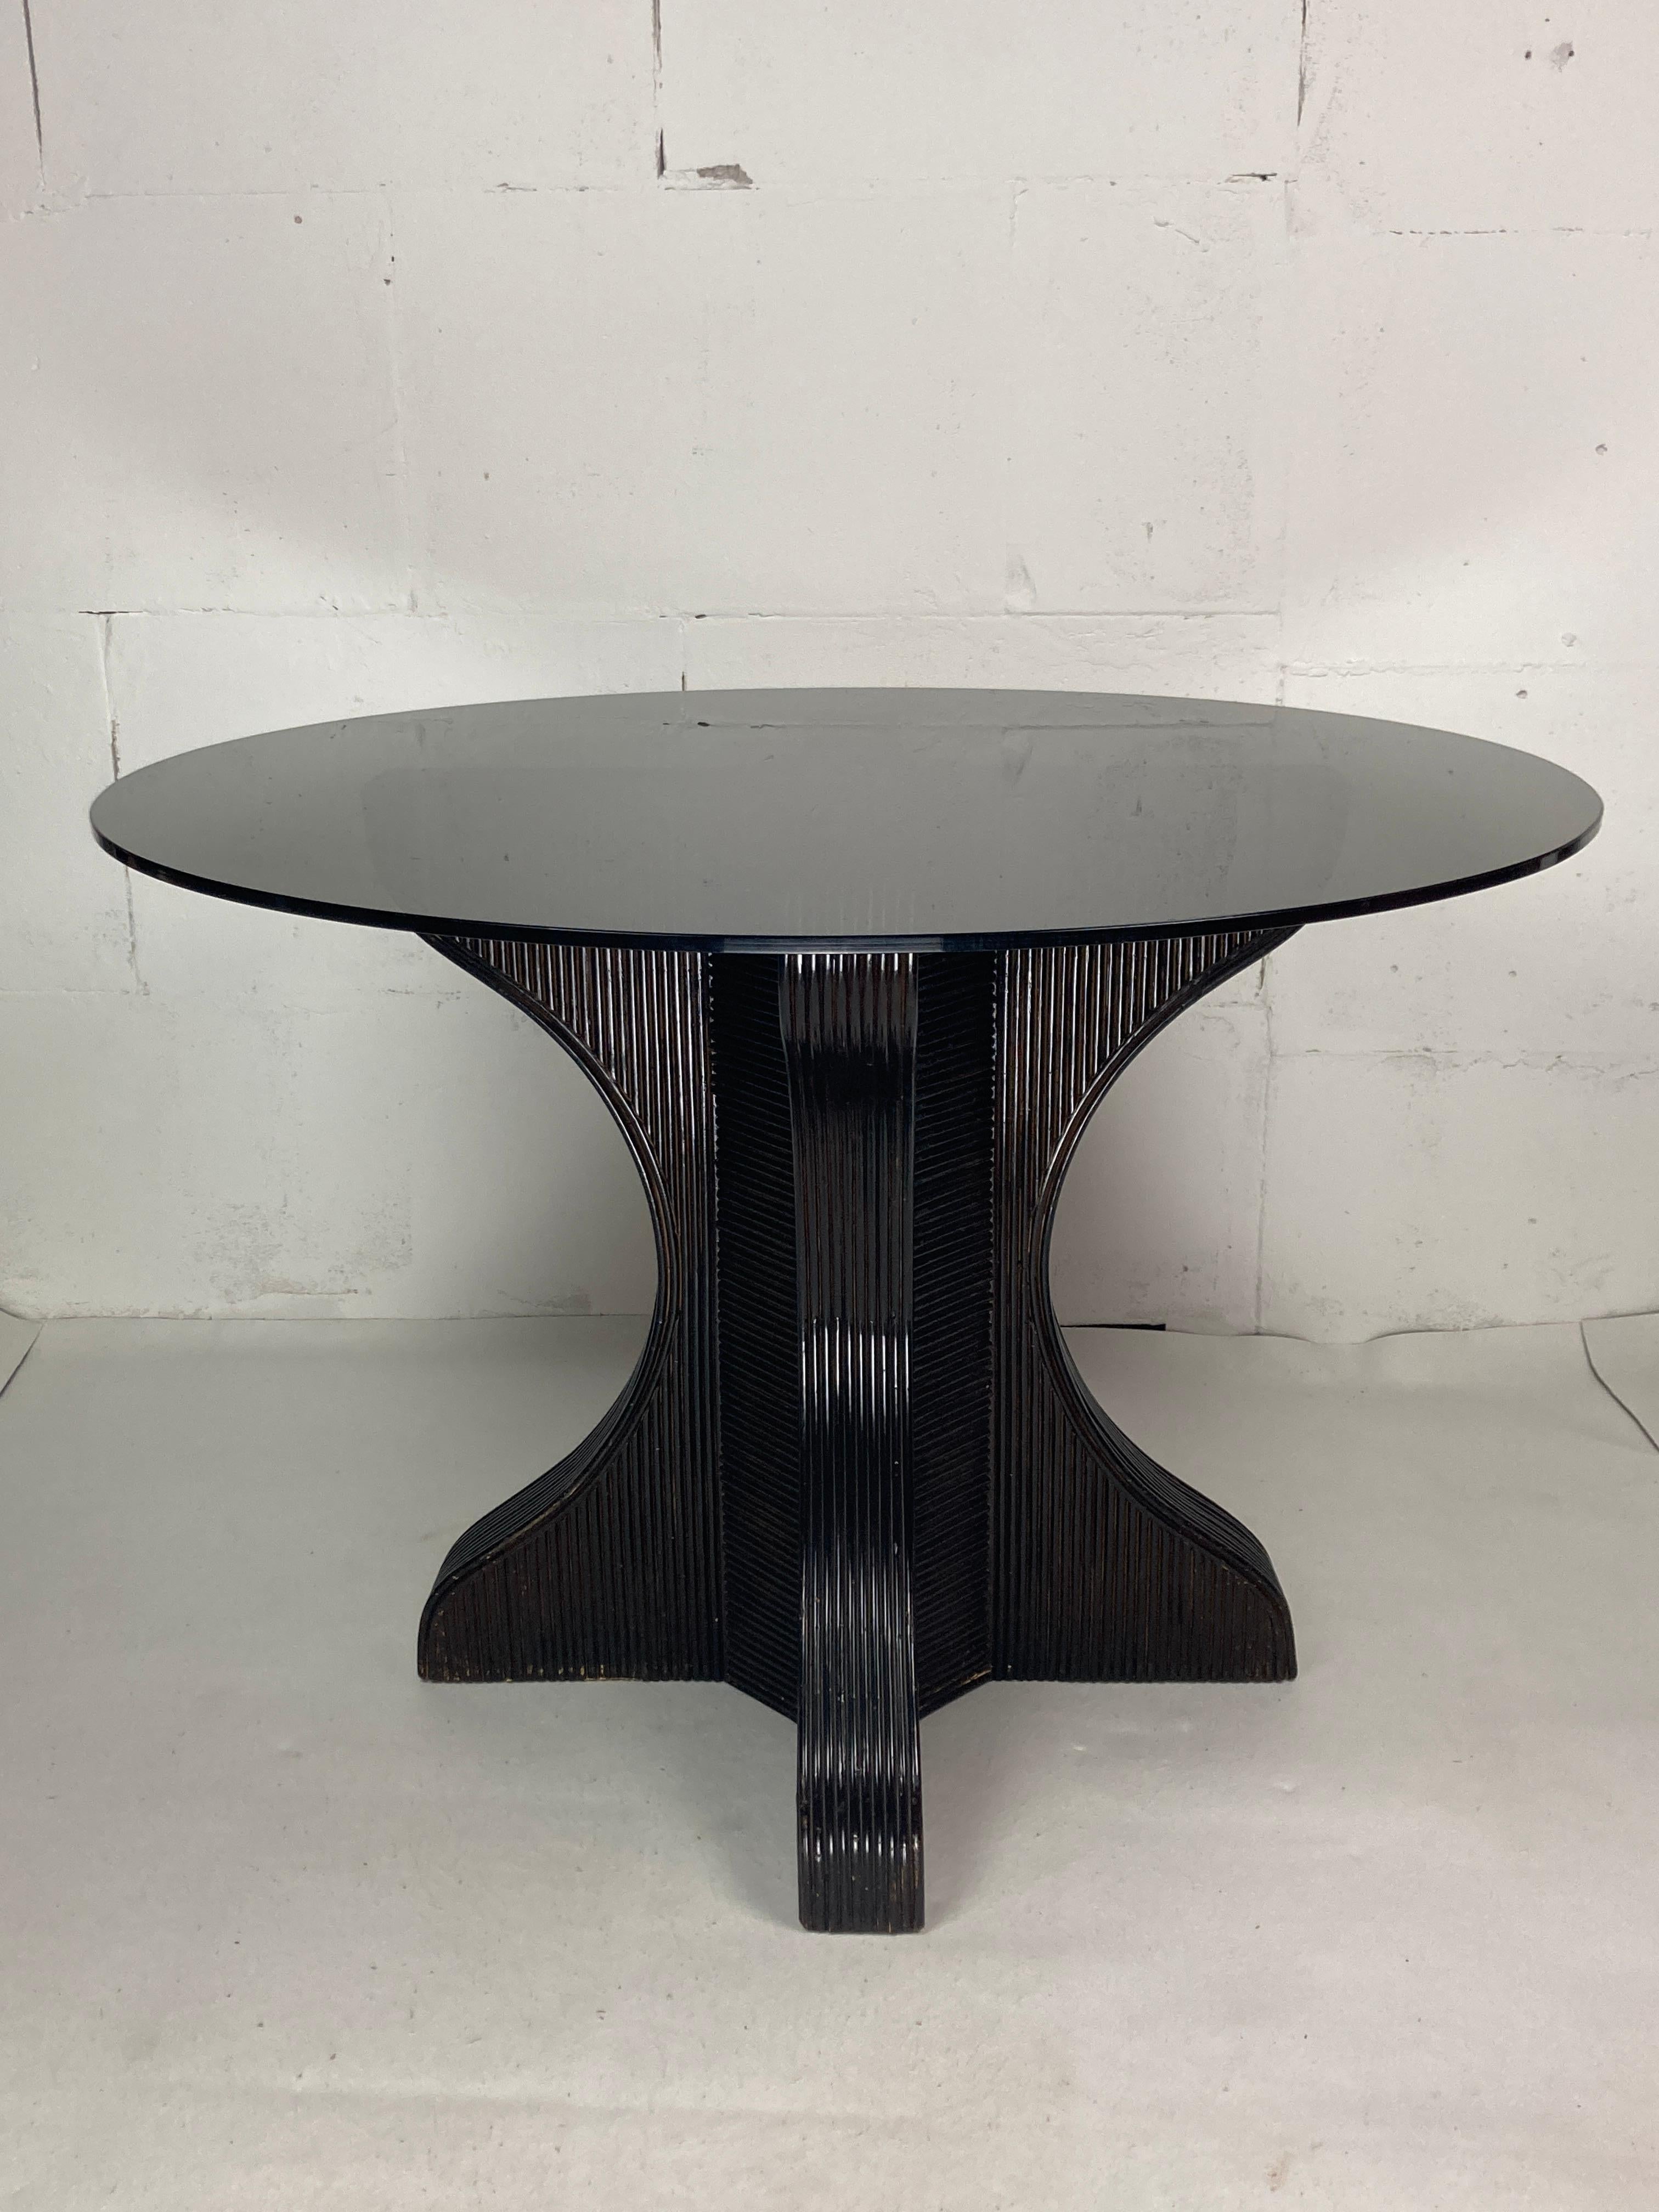 Wonderful deep dark brown pencil or split reed table base with smoked glass top, 1970s. This table base in in lovely vintage condition with general wear but no real flaws to mention. The smoked glass top has some light scratching around the center